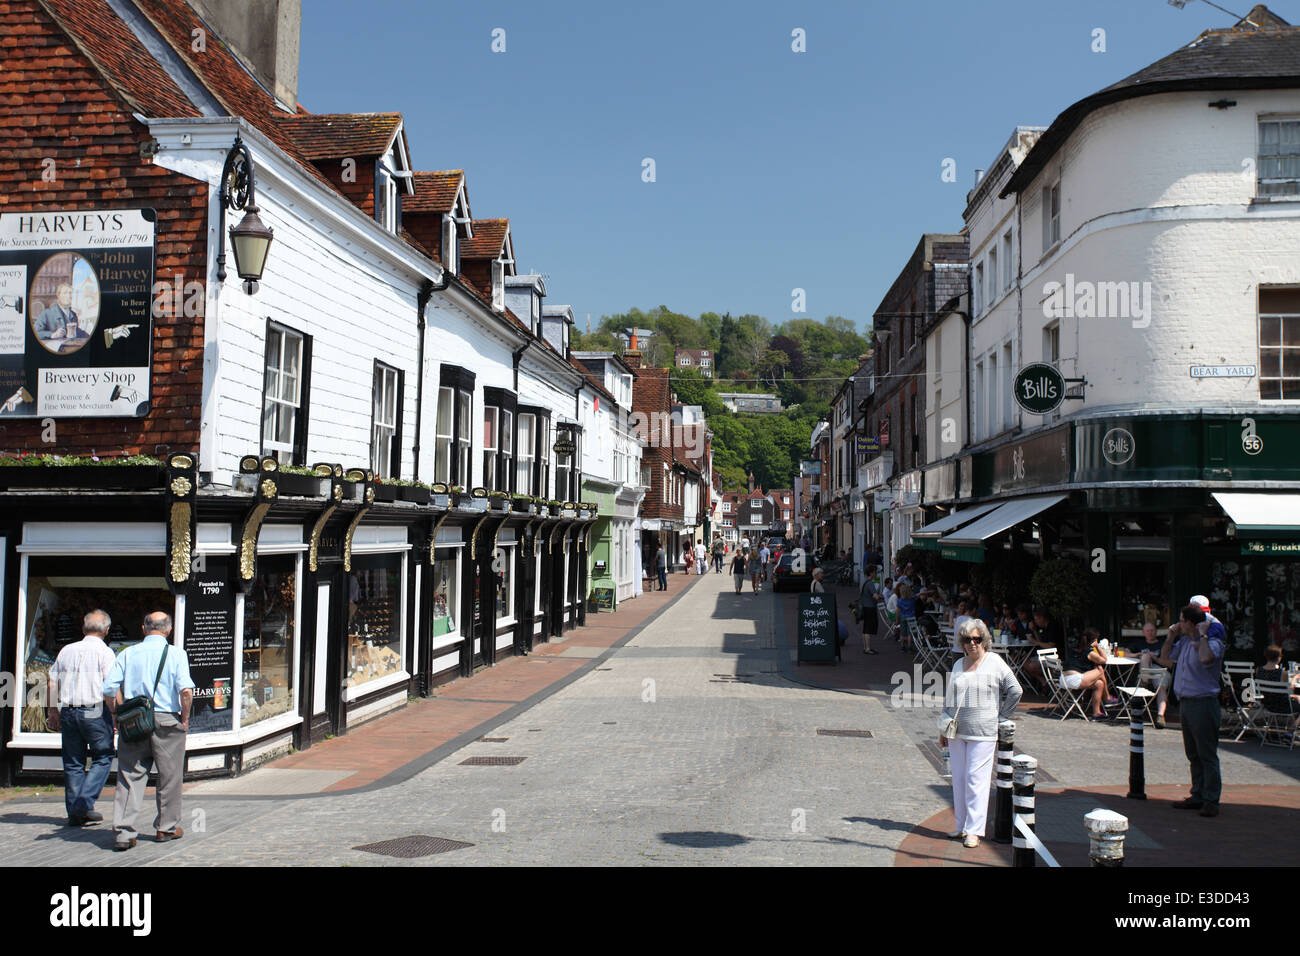 Cliffe High Street, Lewes. Stock Photo